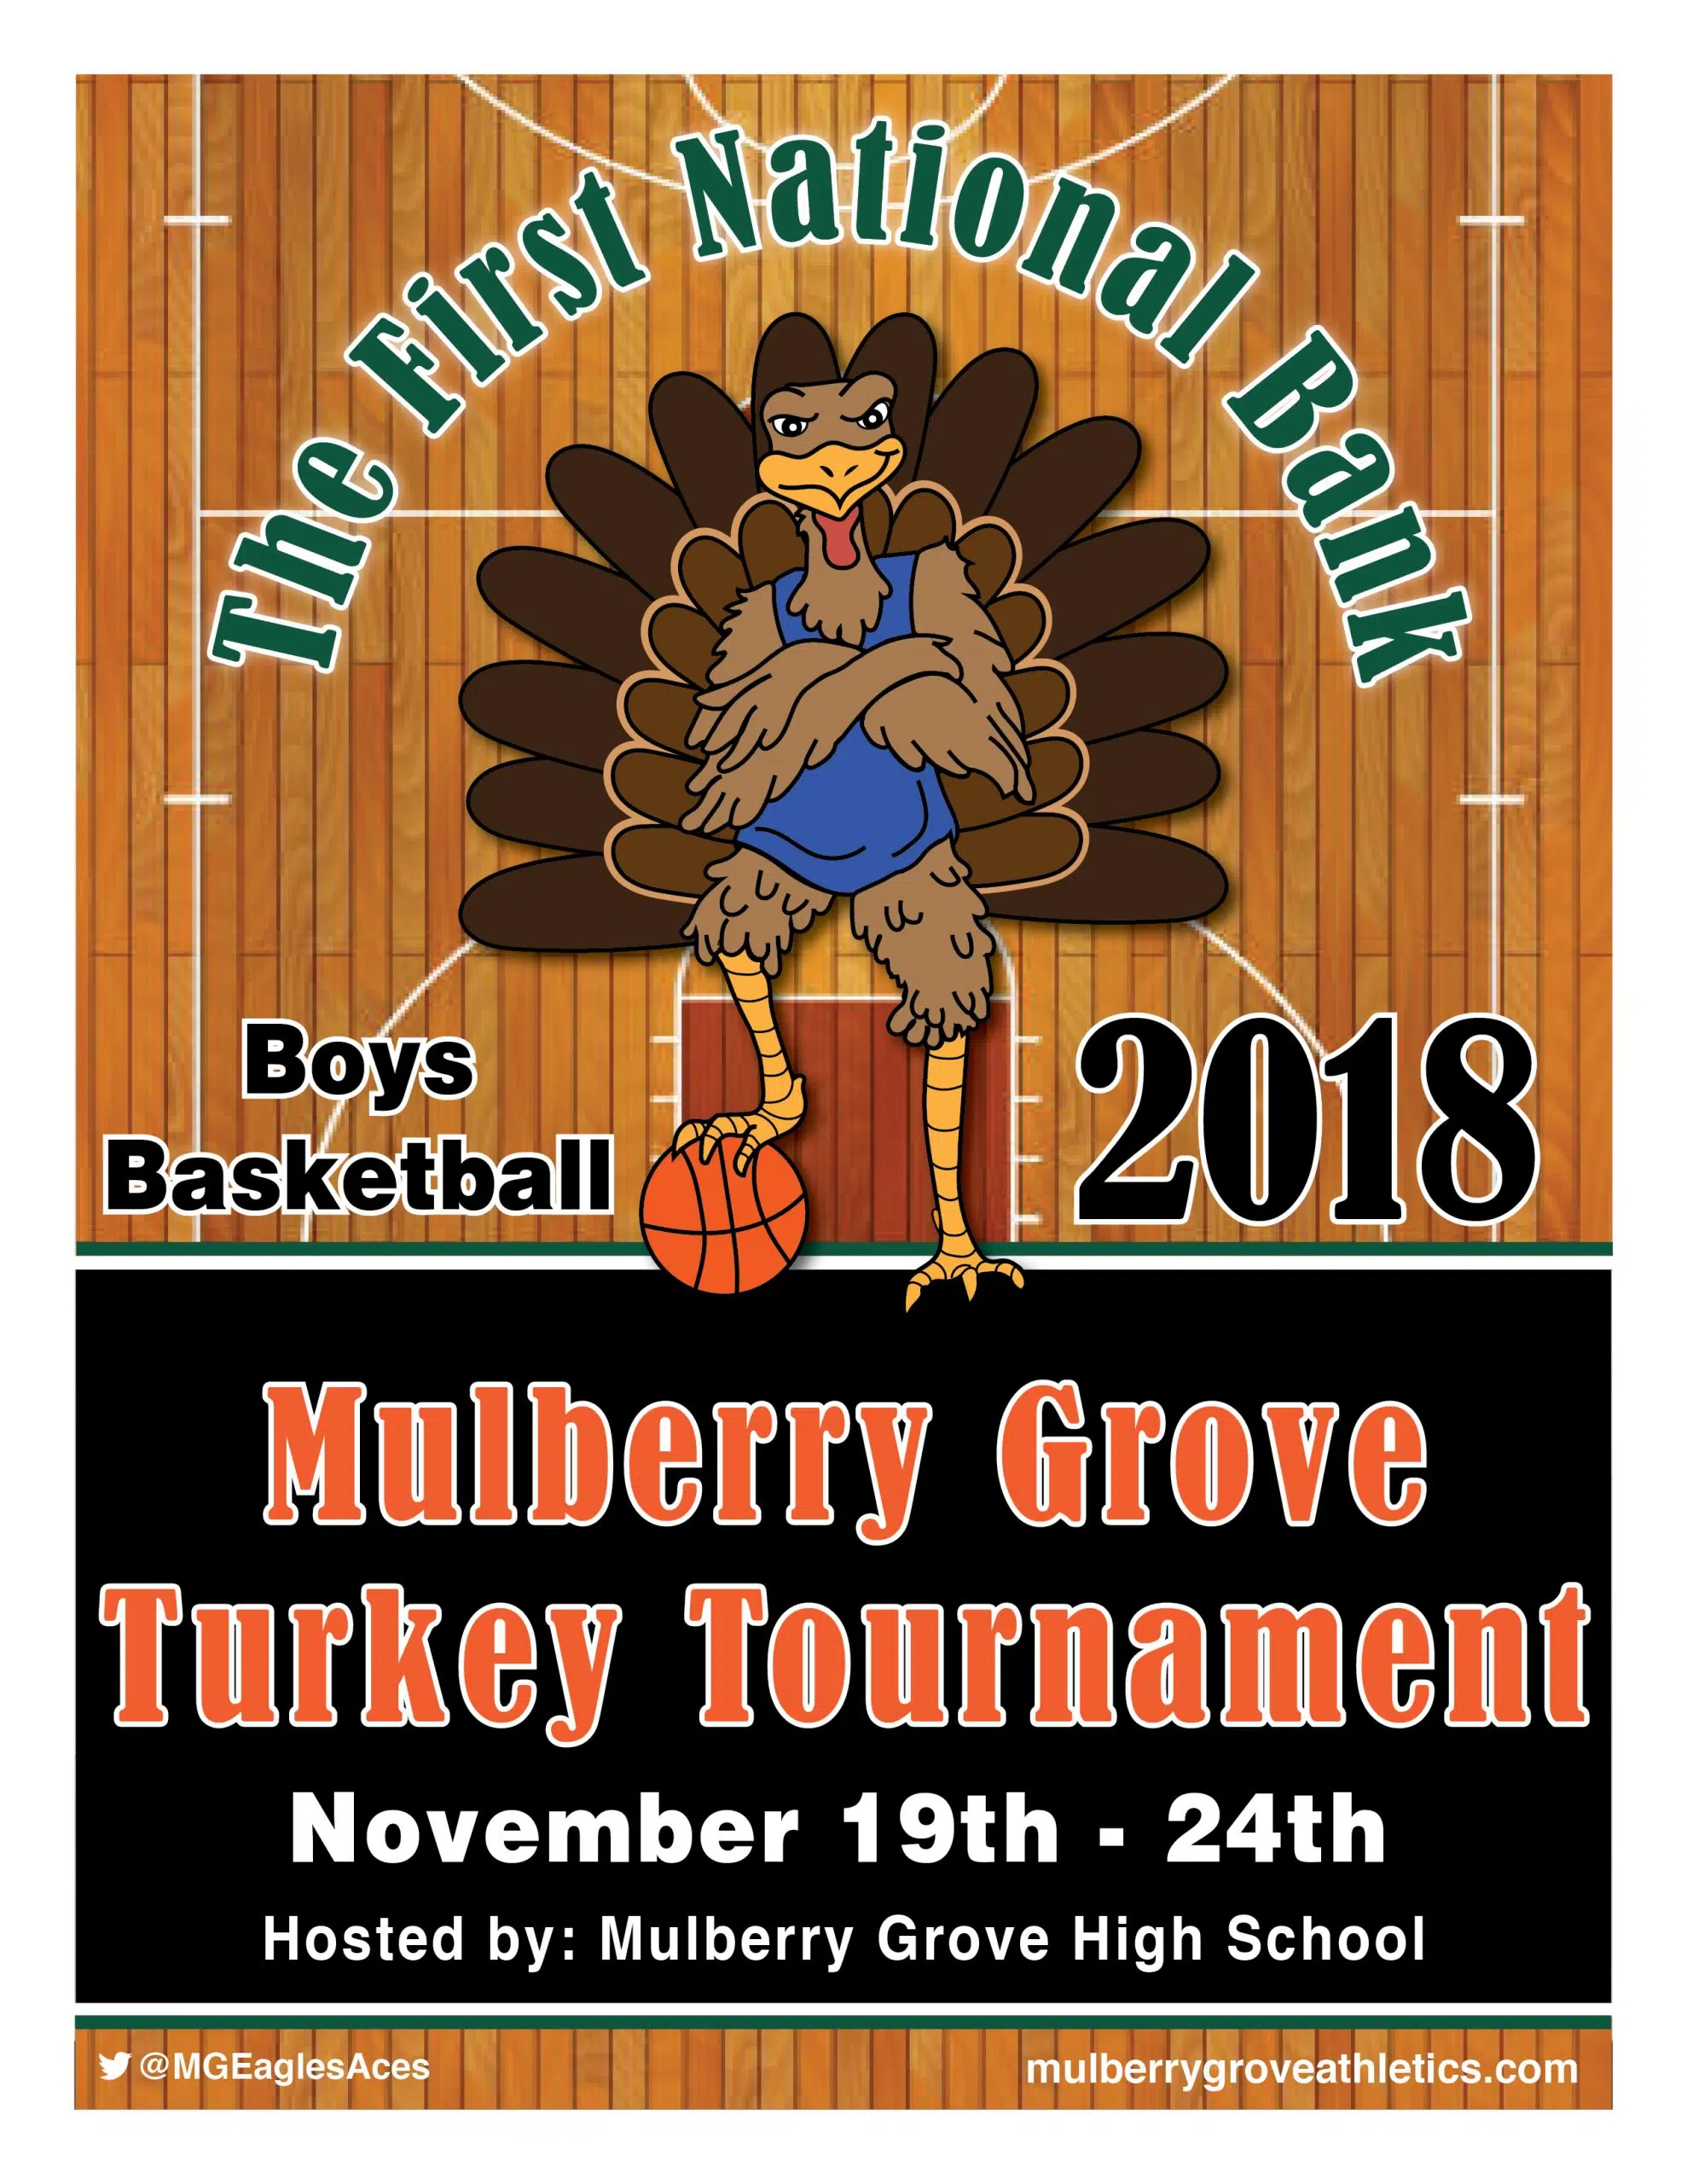 Mulberry Grove, SEB will play for Championship at FNB-MG Thanksgiving Tournament 